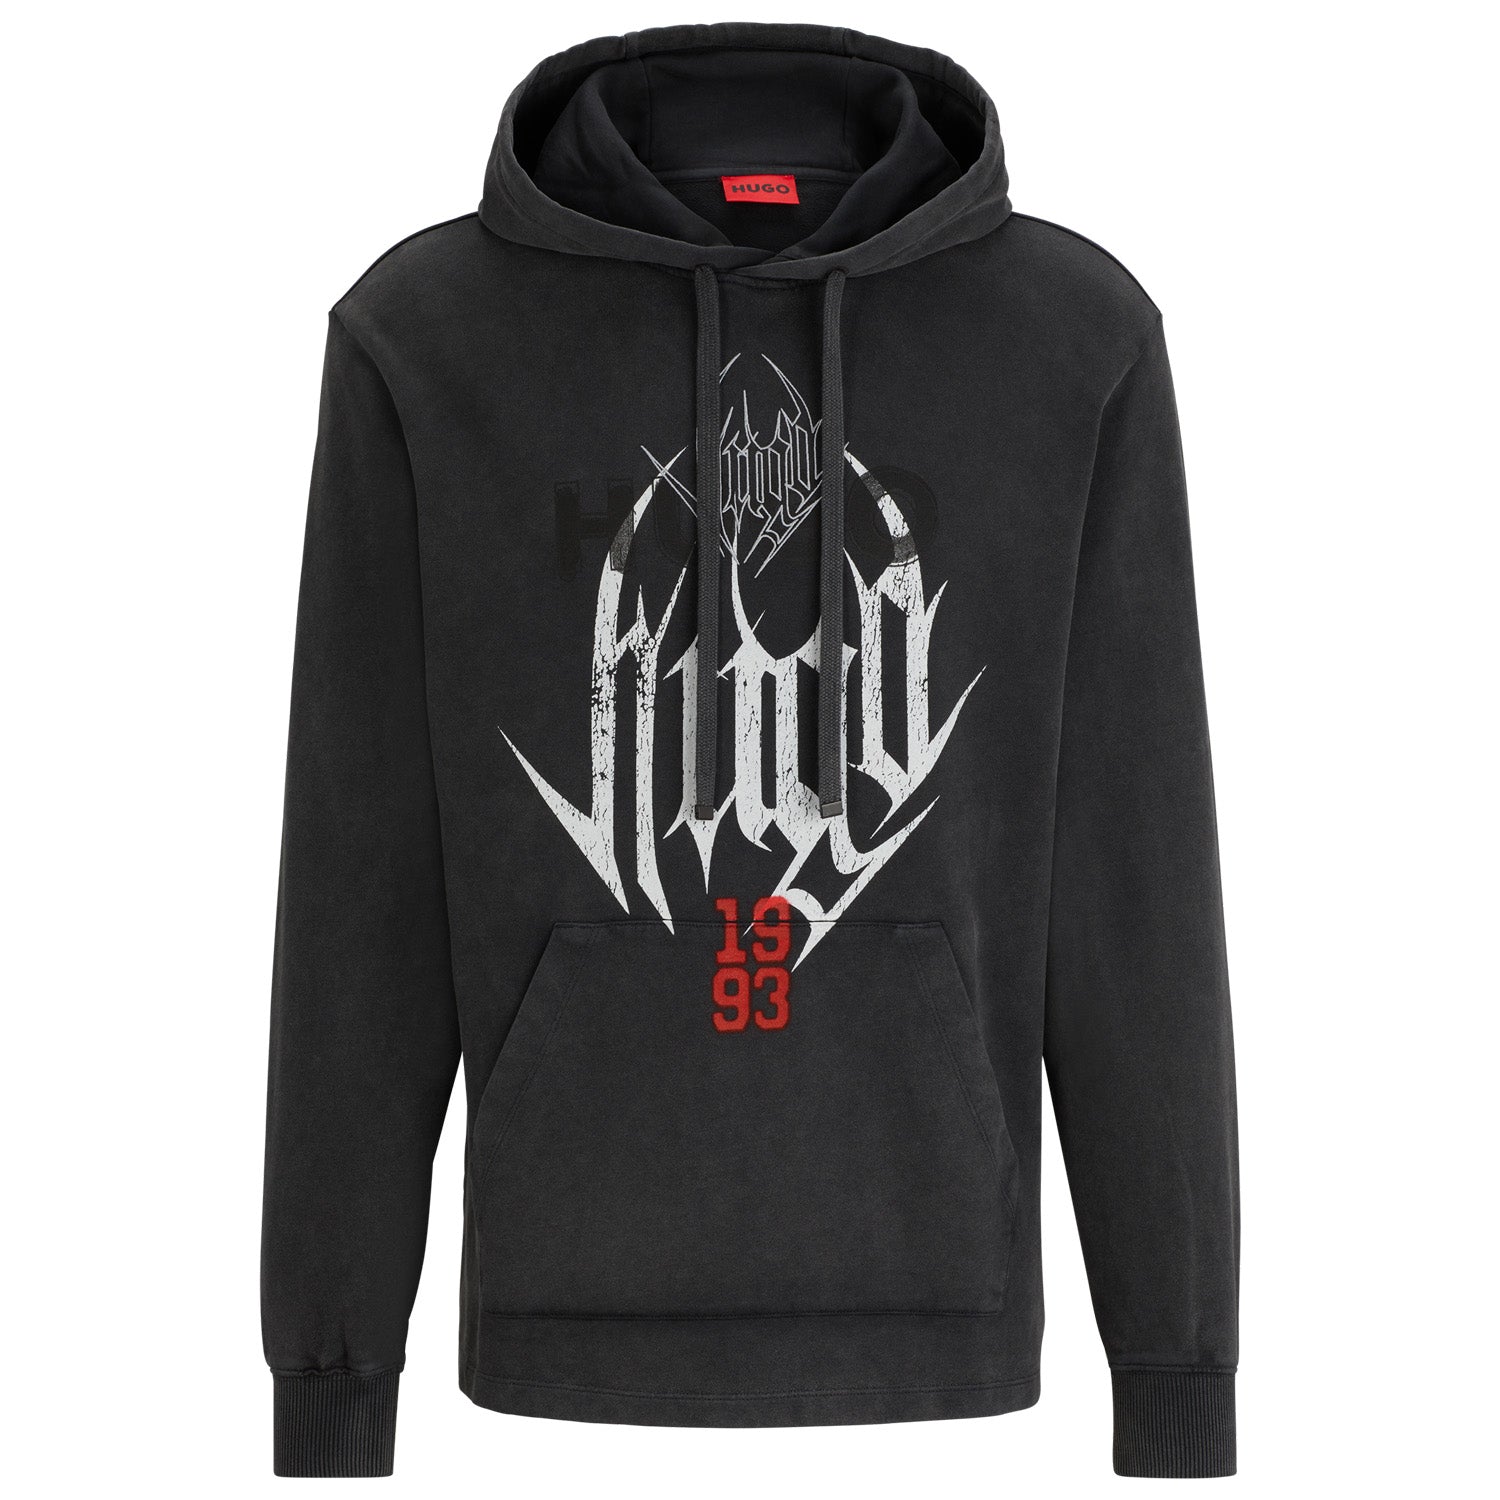 Oversized-fit French-terry hoodie with band-inspired artwork